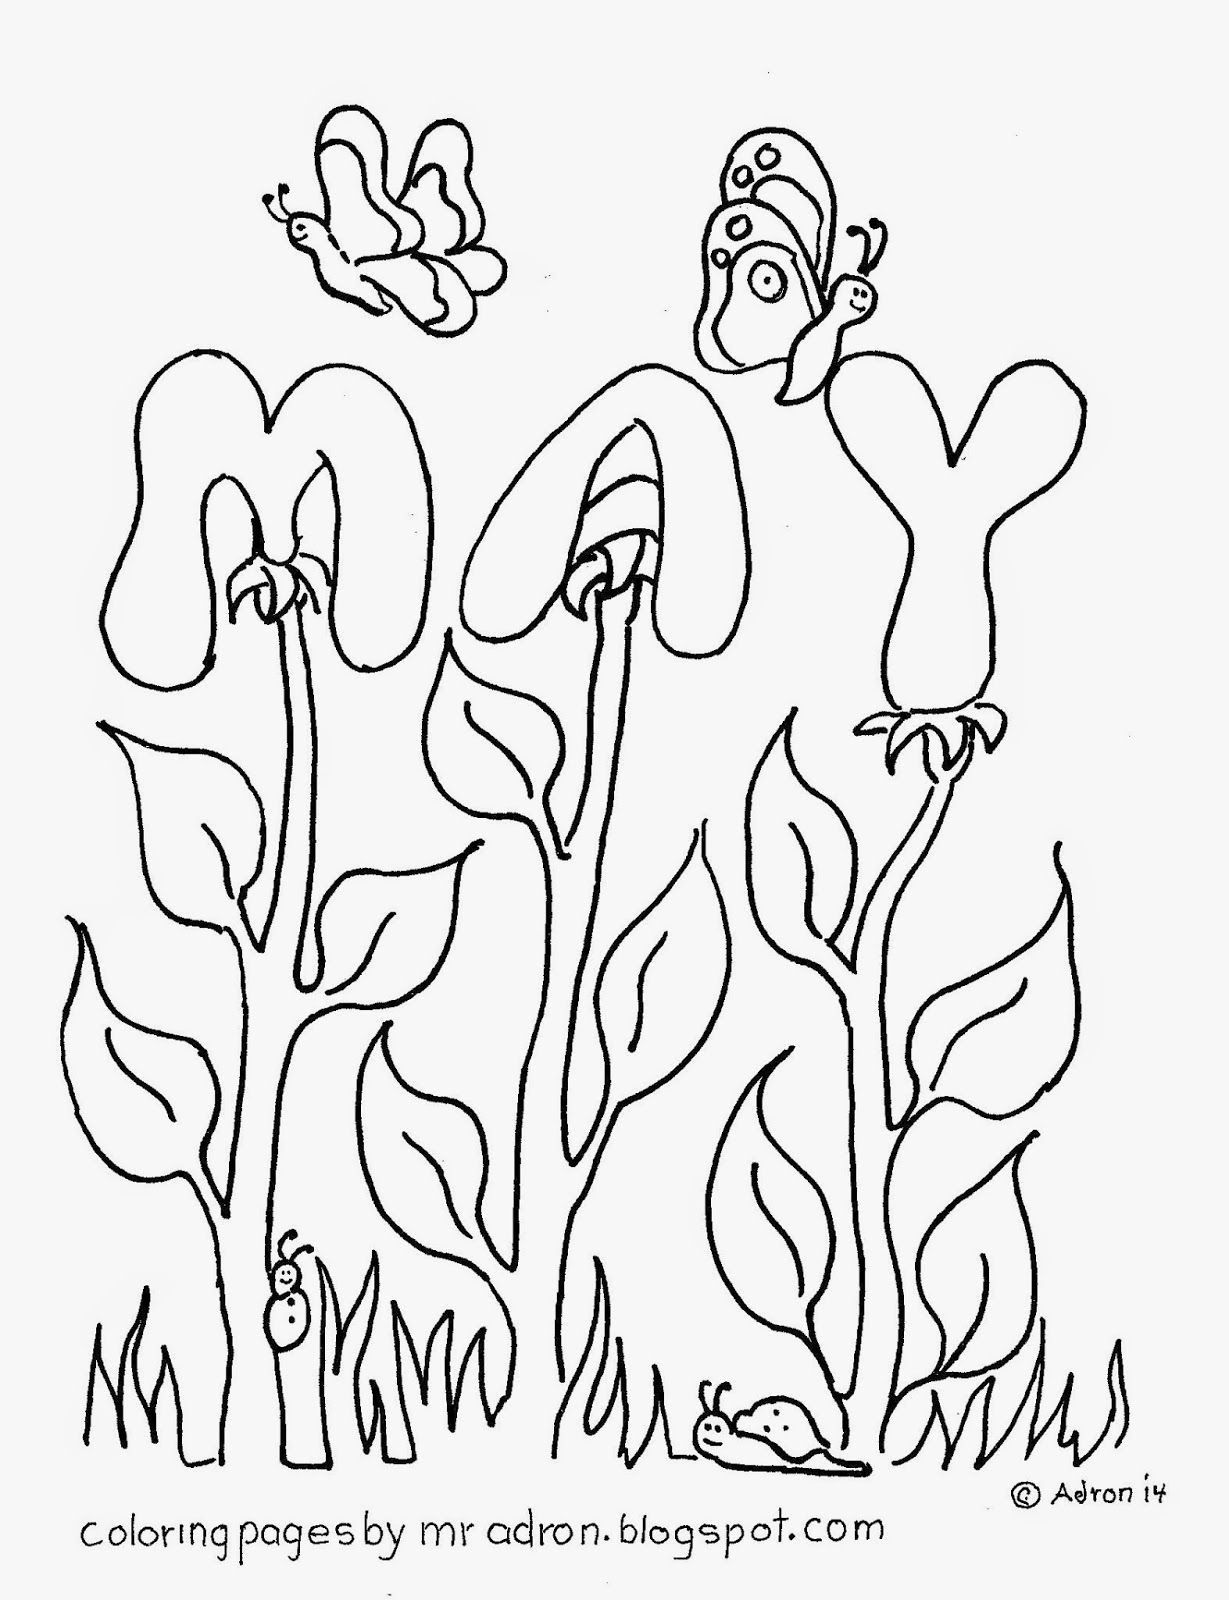 Coloring Pages For Kids By Mr Adron The Month Of May Free Coloring Page